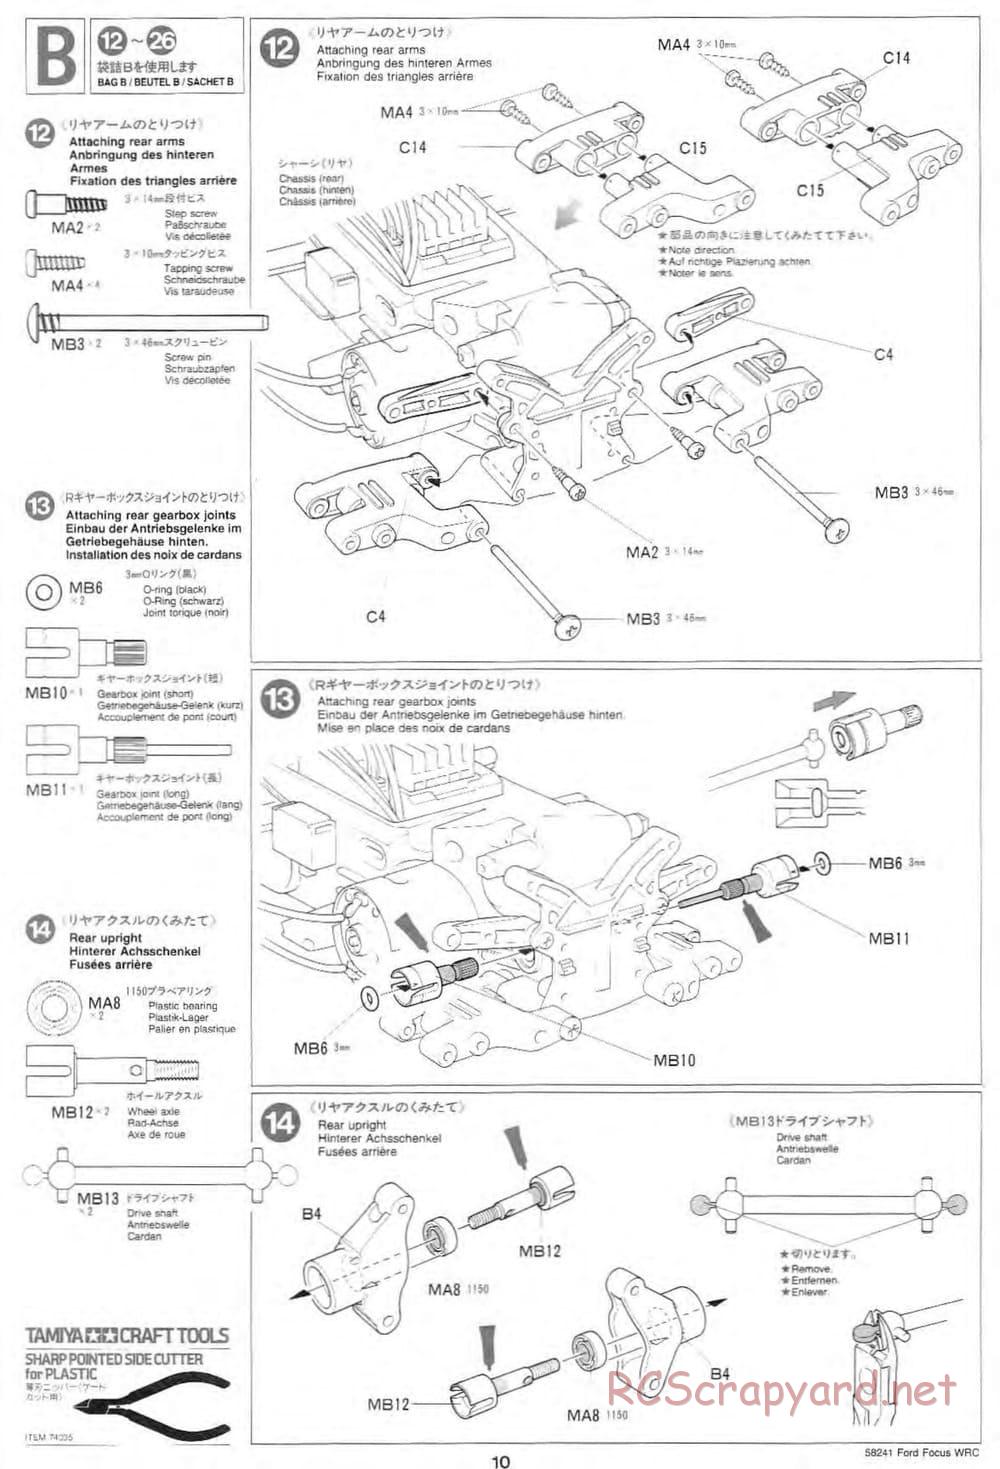 Tamiya - Ford Focus WRC - TL-01 Chassis - Manual - Page 10